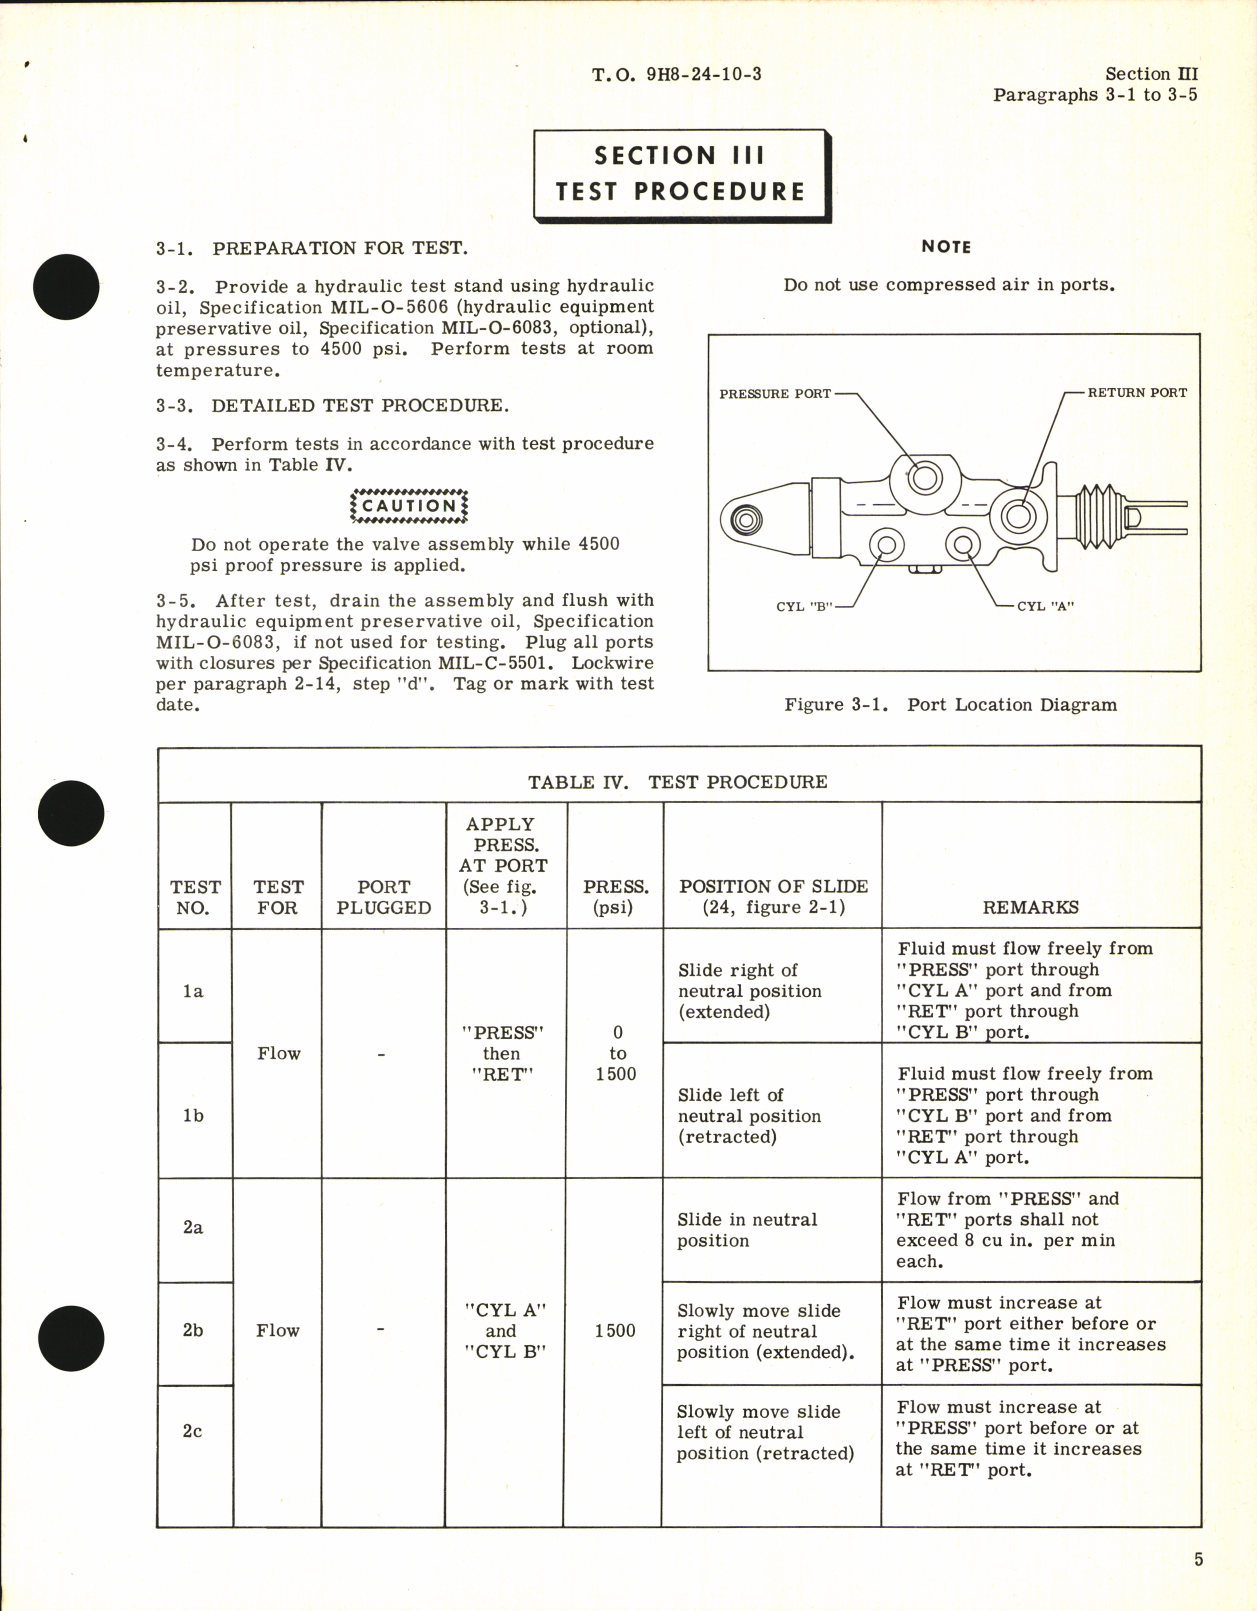 Sample page 5 from AirCorps Library document: Handbook of Overhaul Instructions for Modulated Spoiler Metering Valve Assembly Part No. 5-83957